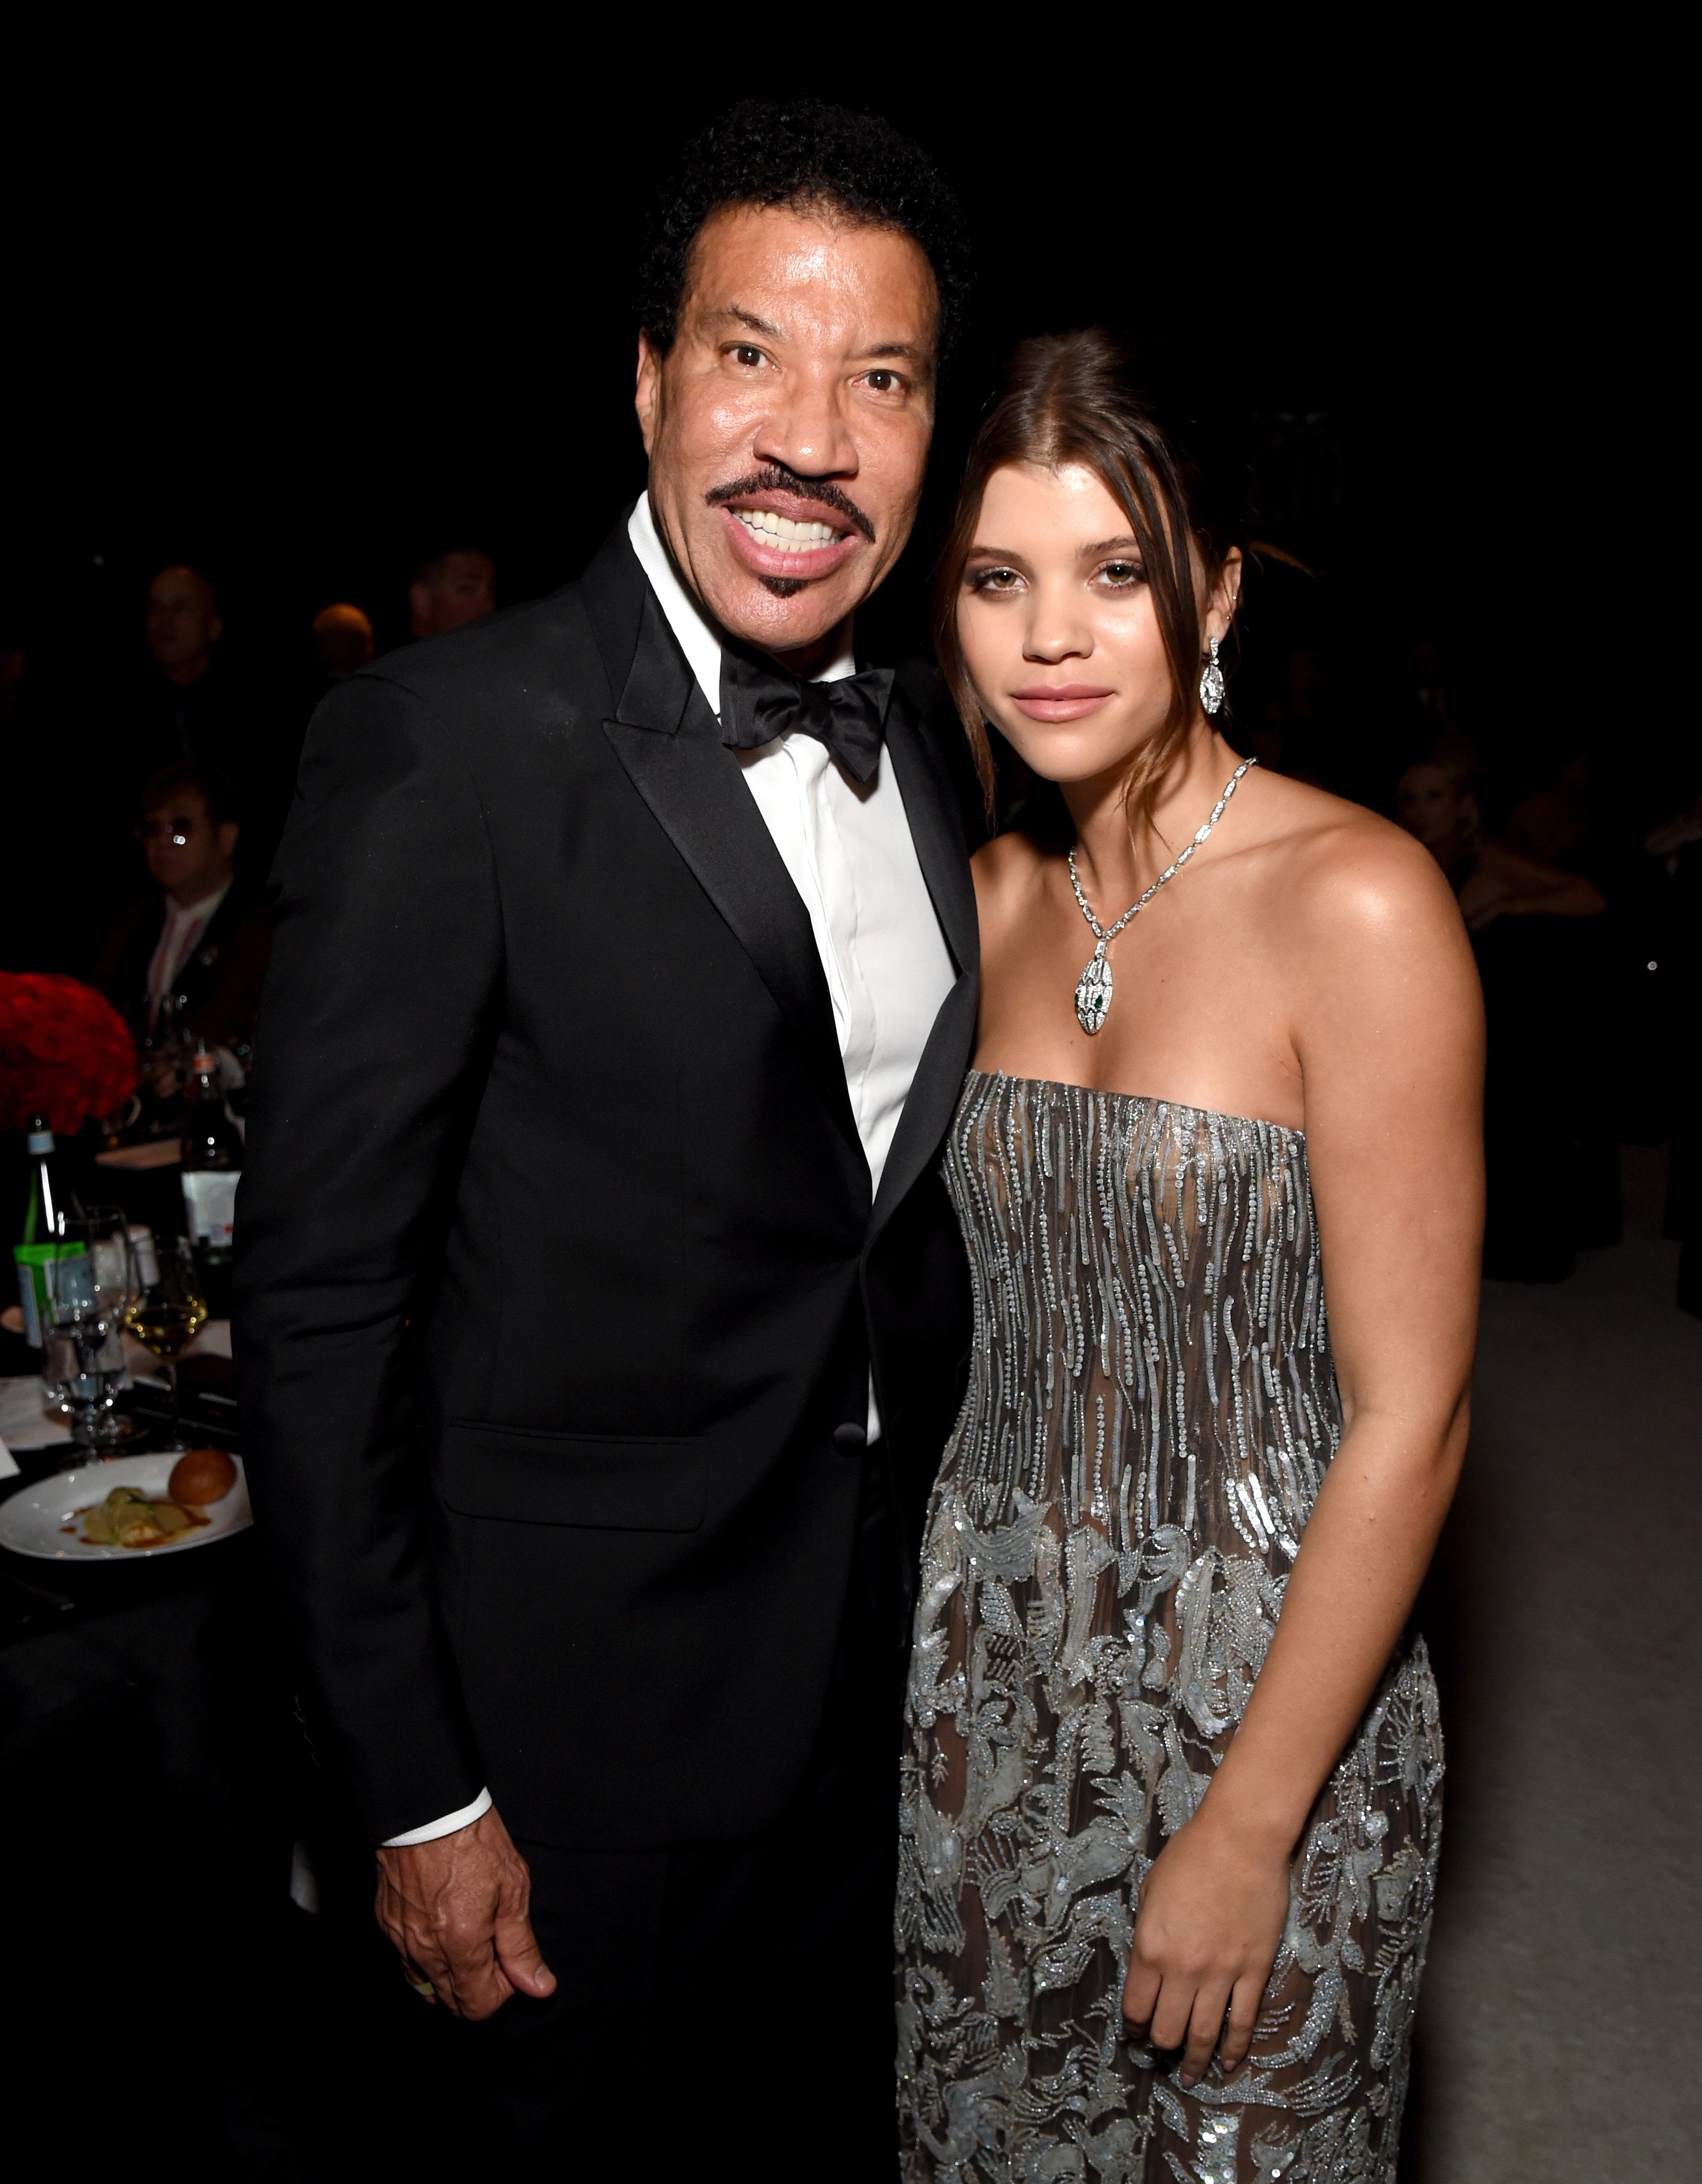 Lionel Richie and Sofia Richie attend the 26th annual Elton John AIDS Foundation Academy Awards Viewing Party on March 4, 2018, in West Hollywood, California. | Source: Getty Images.